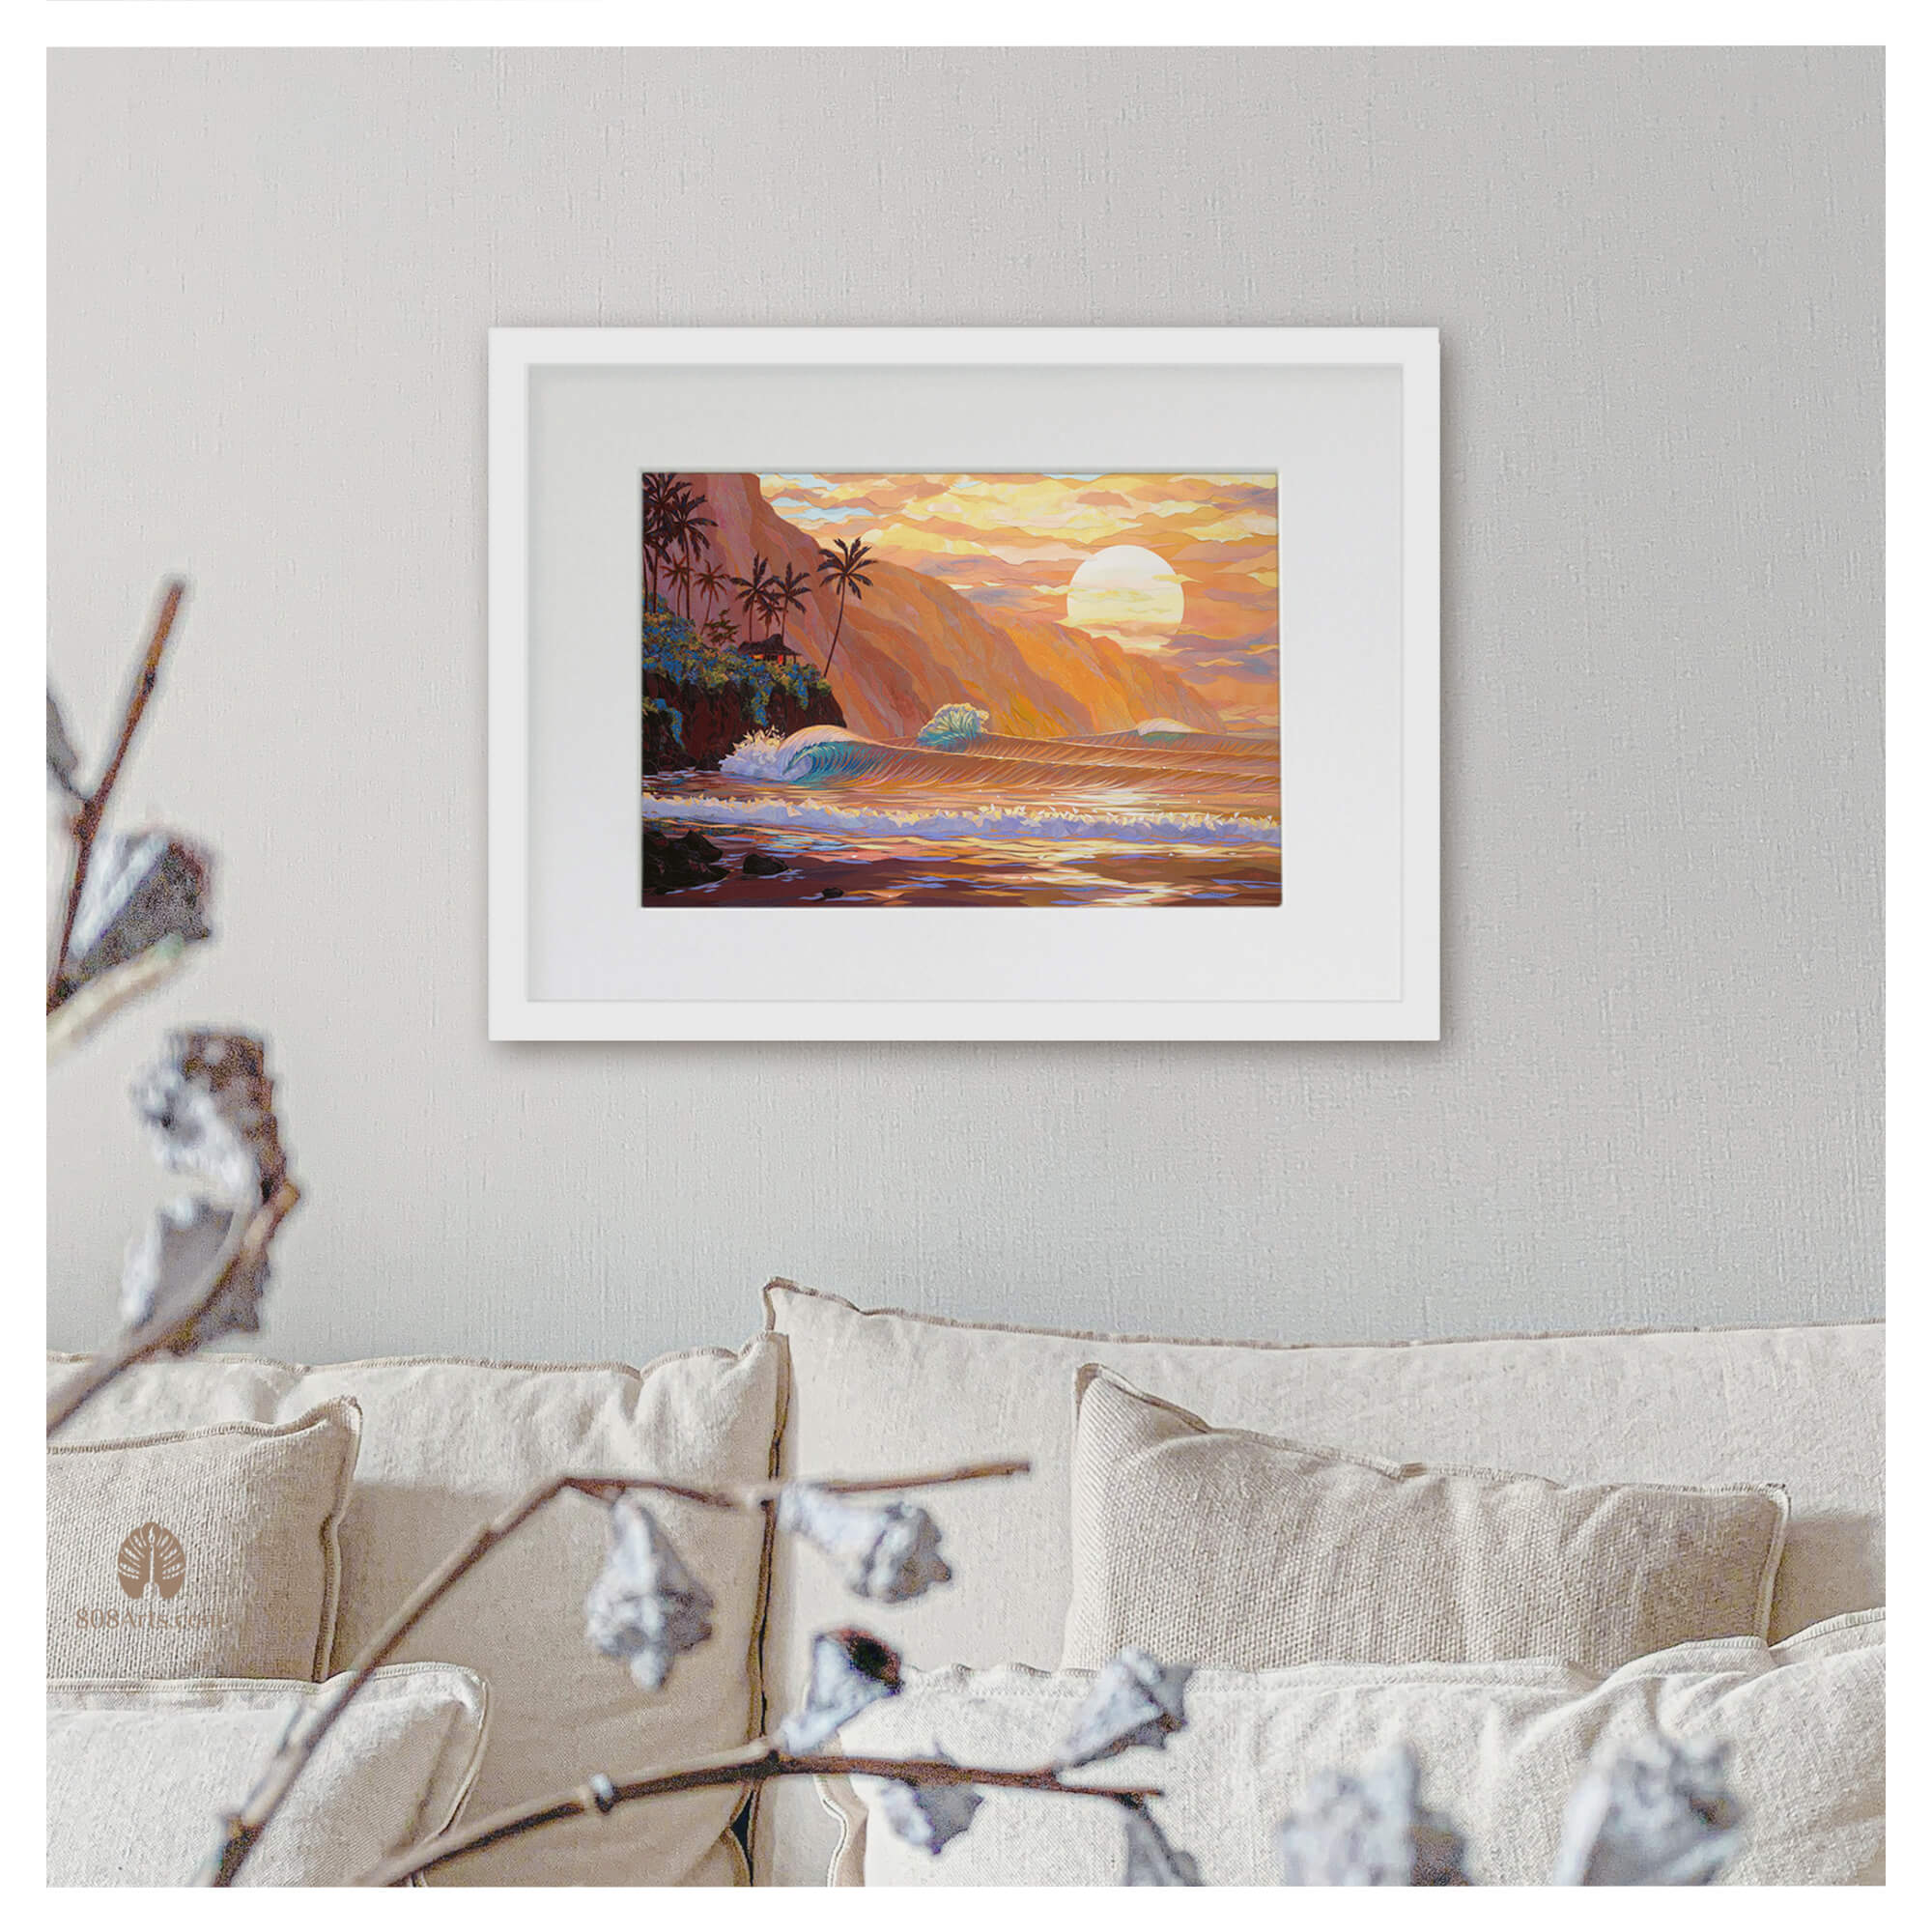 A framed matted art print featuring a collage of a sunset view of the ocean as seen from a tropical beach in Hawaii by Hawaii artist Patrick Parker